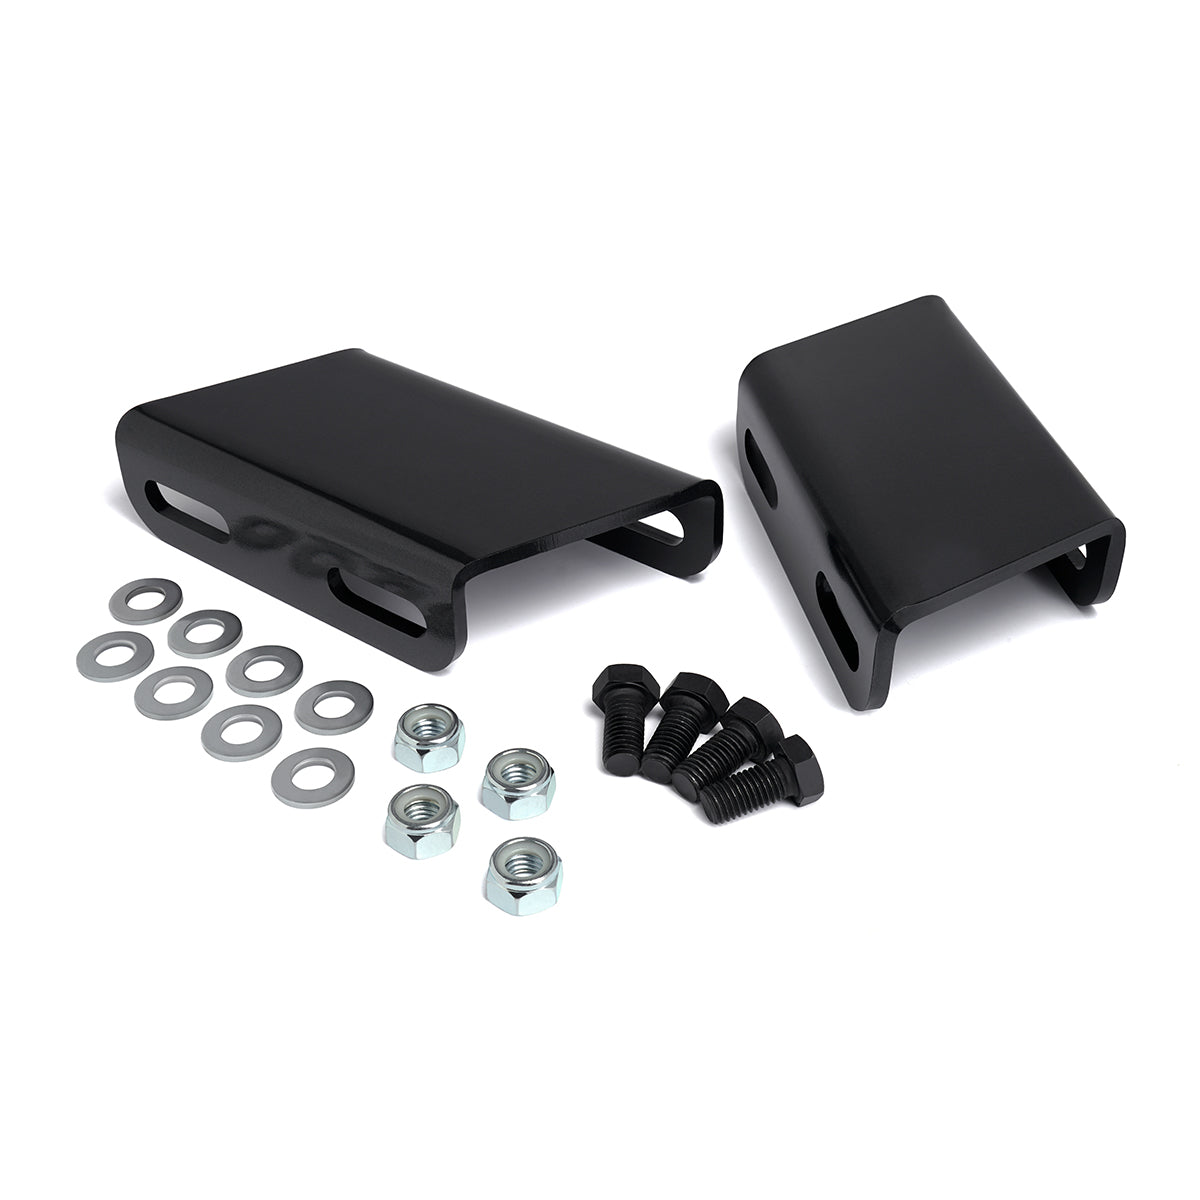 1994-2012 Dodge Ram 3500 4WD Front Lift Kit with Sway Bar Drop Bracket